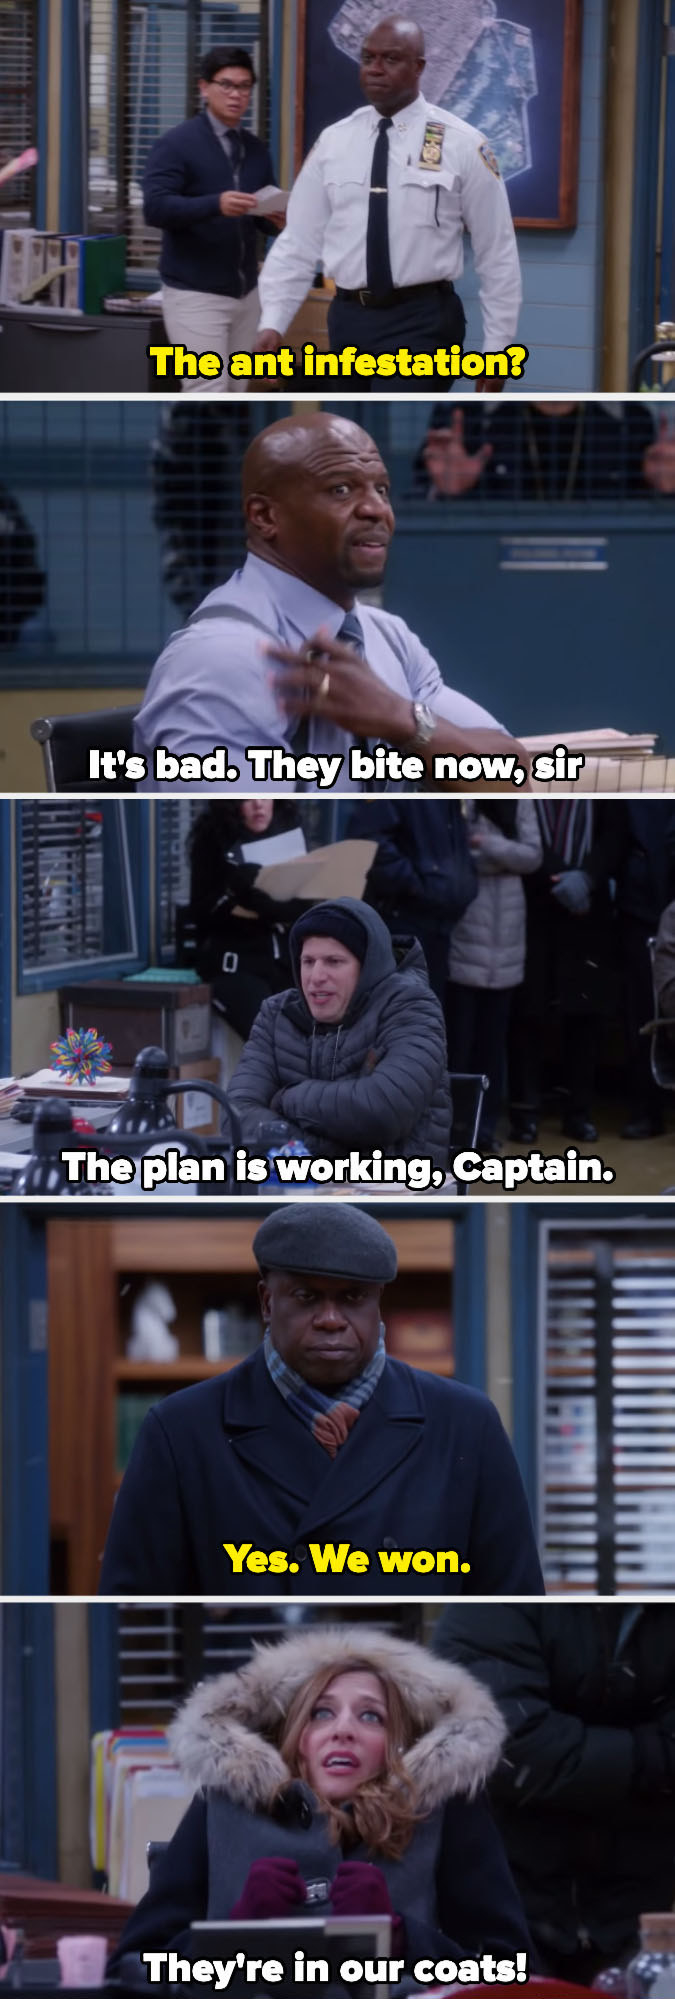 Captain Holt trying to freeze the ants out, but the ants just nestling in the groups coats instead of their desks